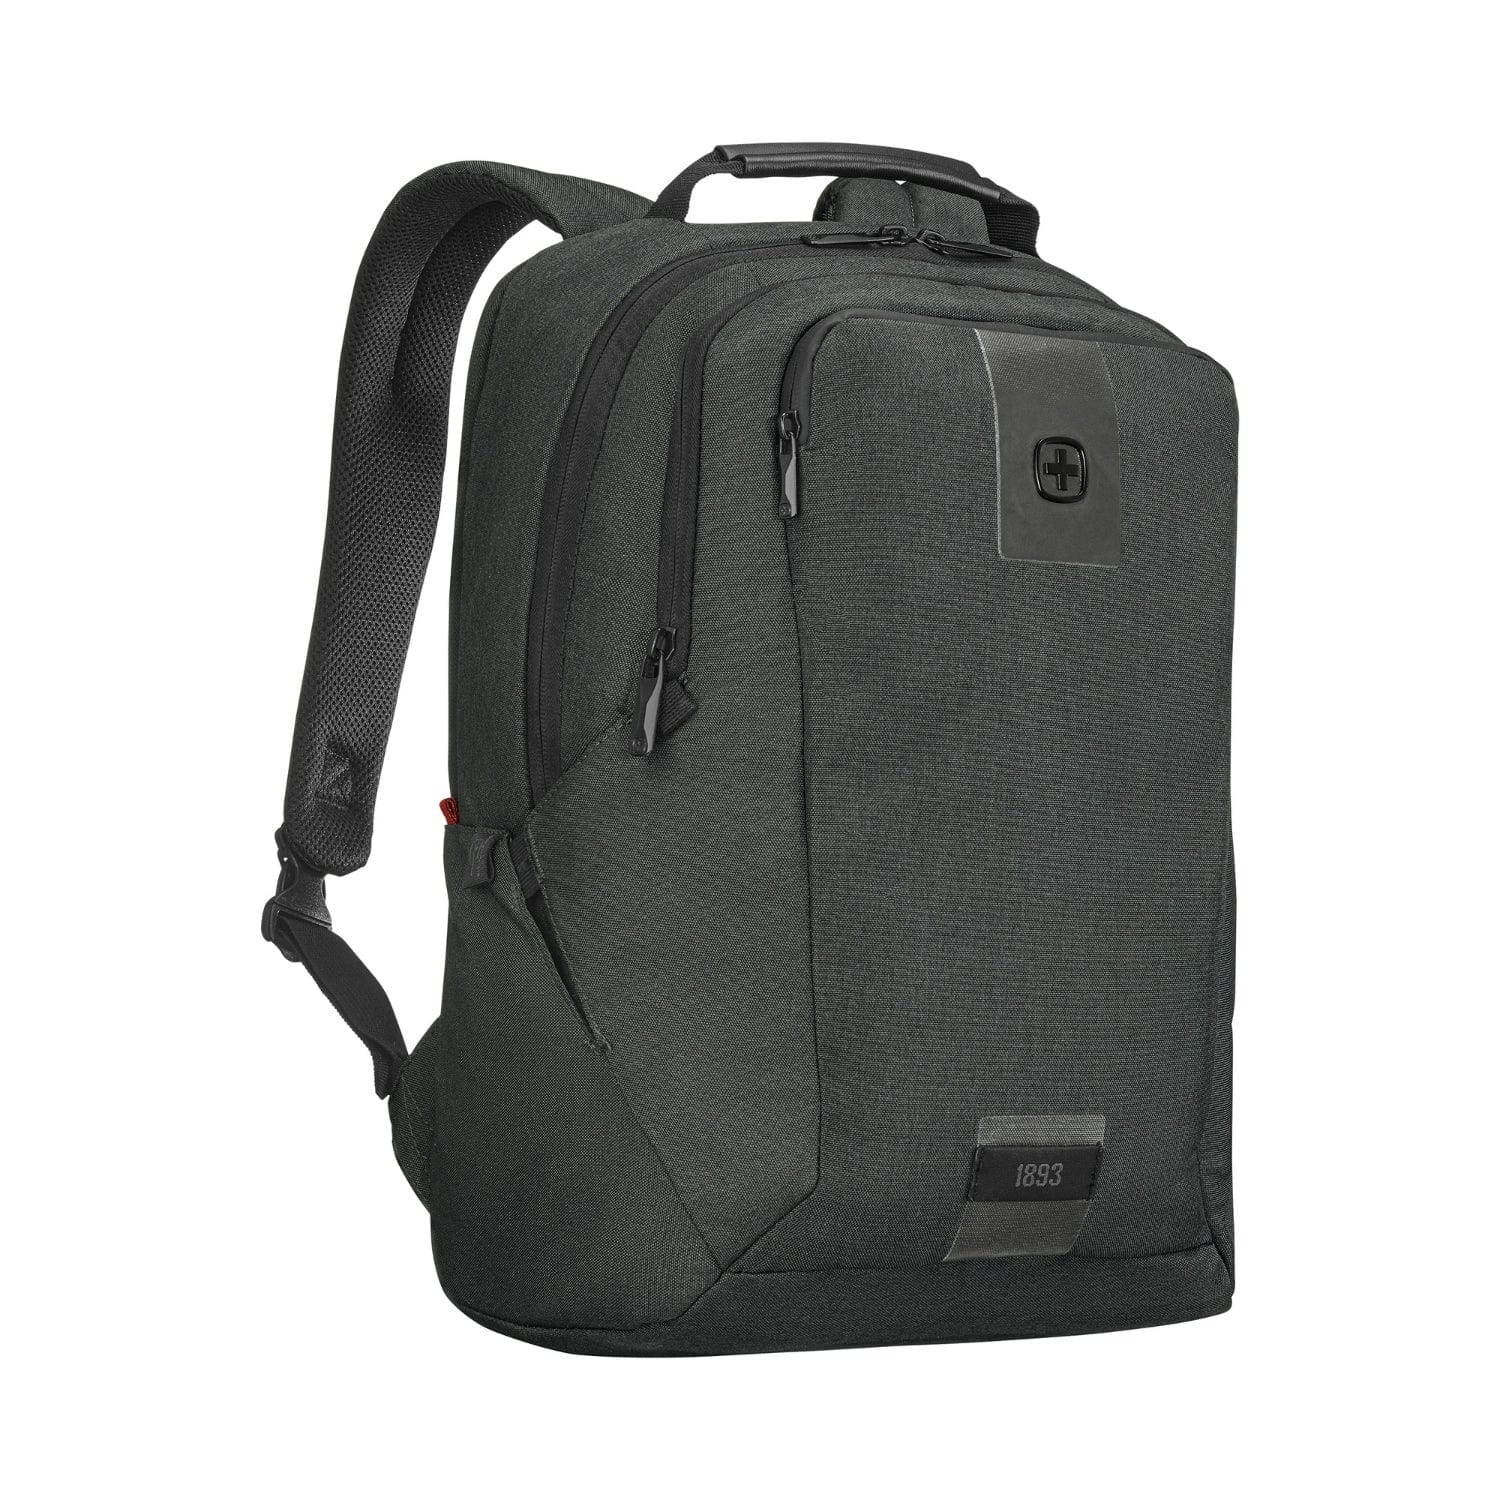 Wenger Mx Eco Professional 16 Laptop Backpack with Tablet Pocket Charcoal - 612261